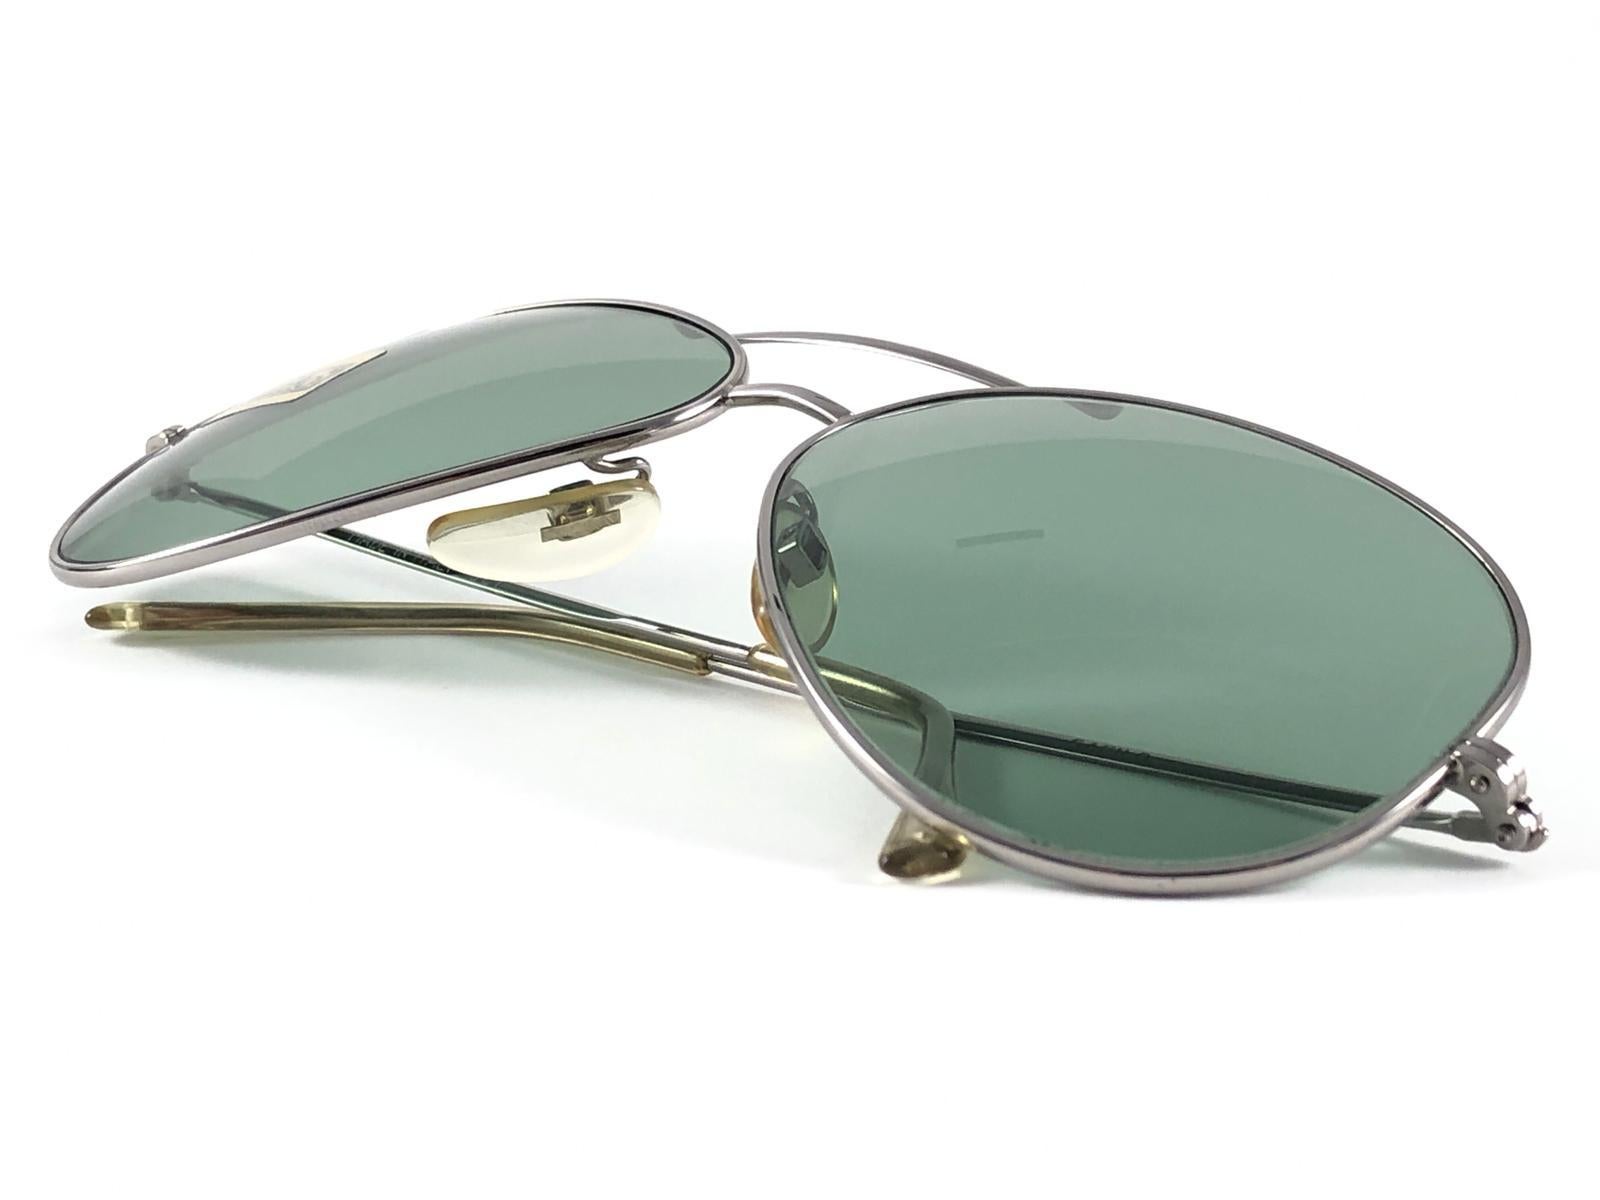 New Vintage Safilo Jet Silver Aviator Frame 1980's Sunglasses Made in Italy For Sale 6